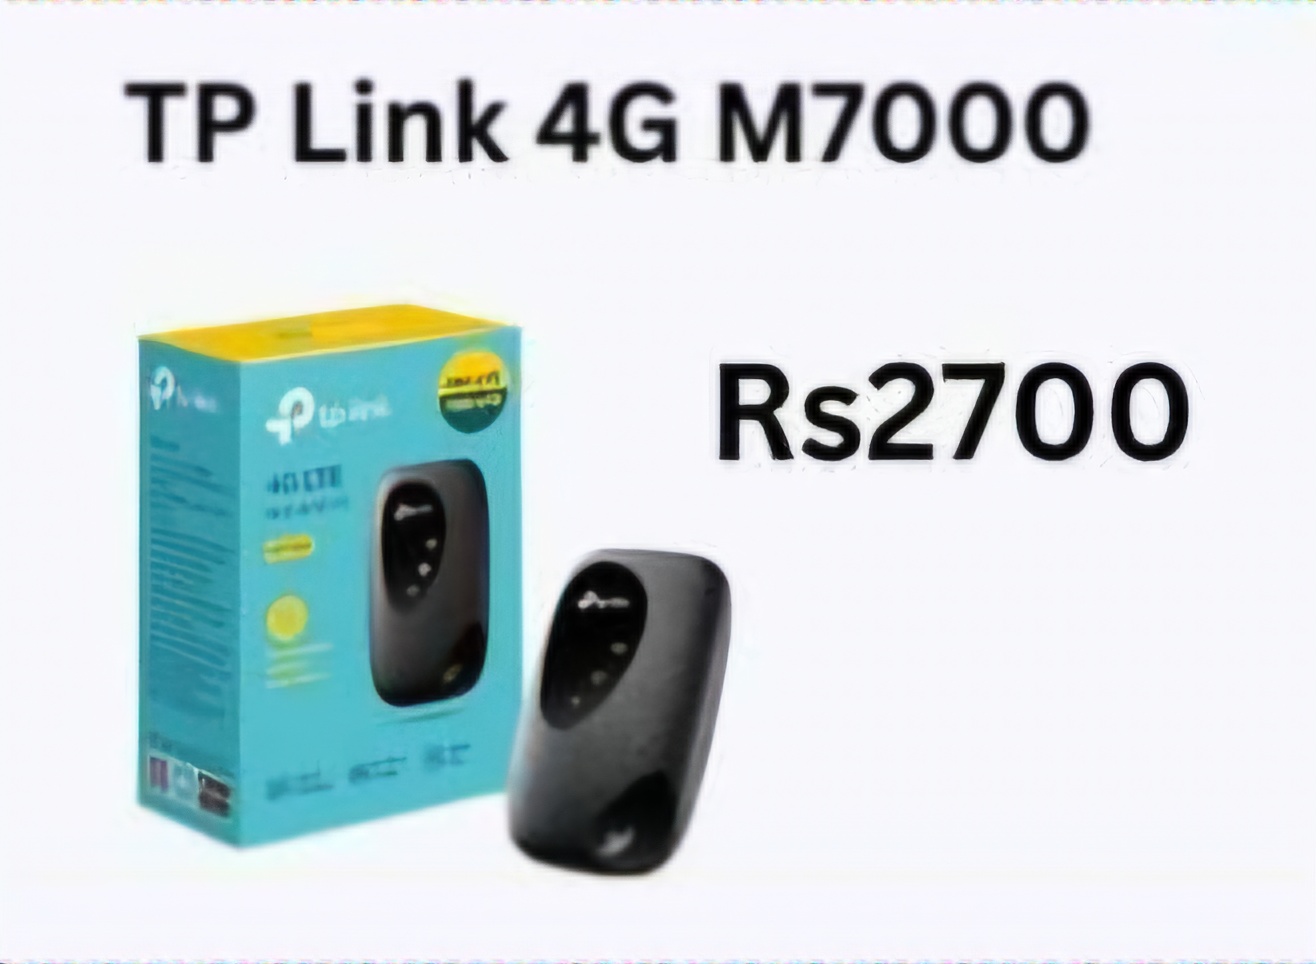 TP-LINK 4G LTE MOBILE WI-FI M7000